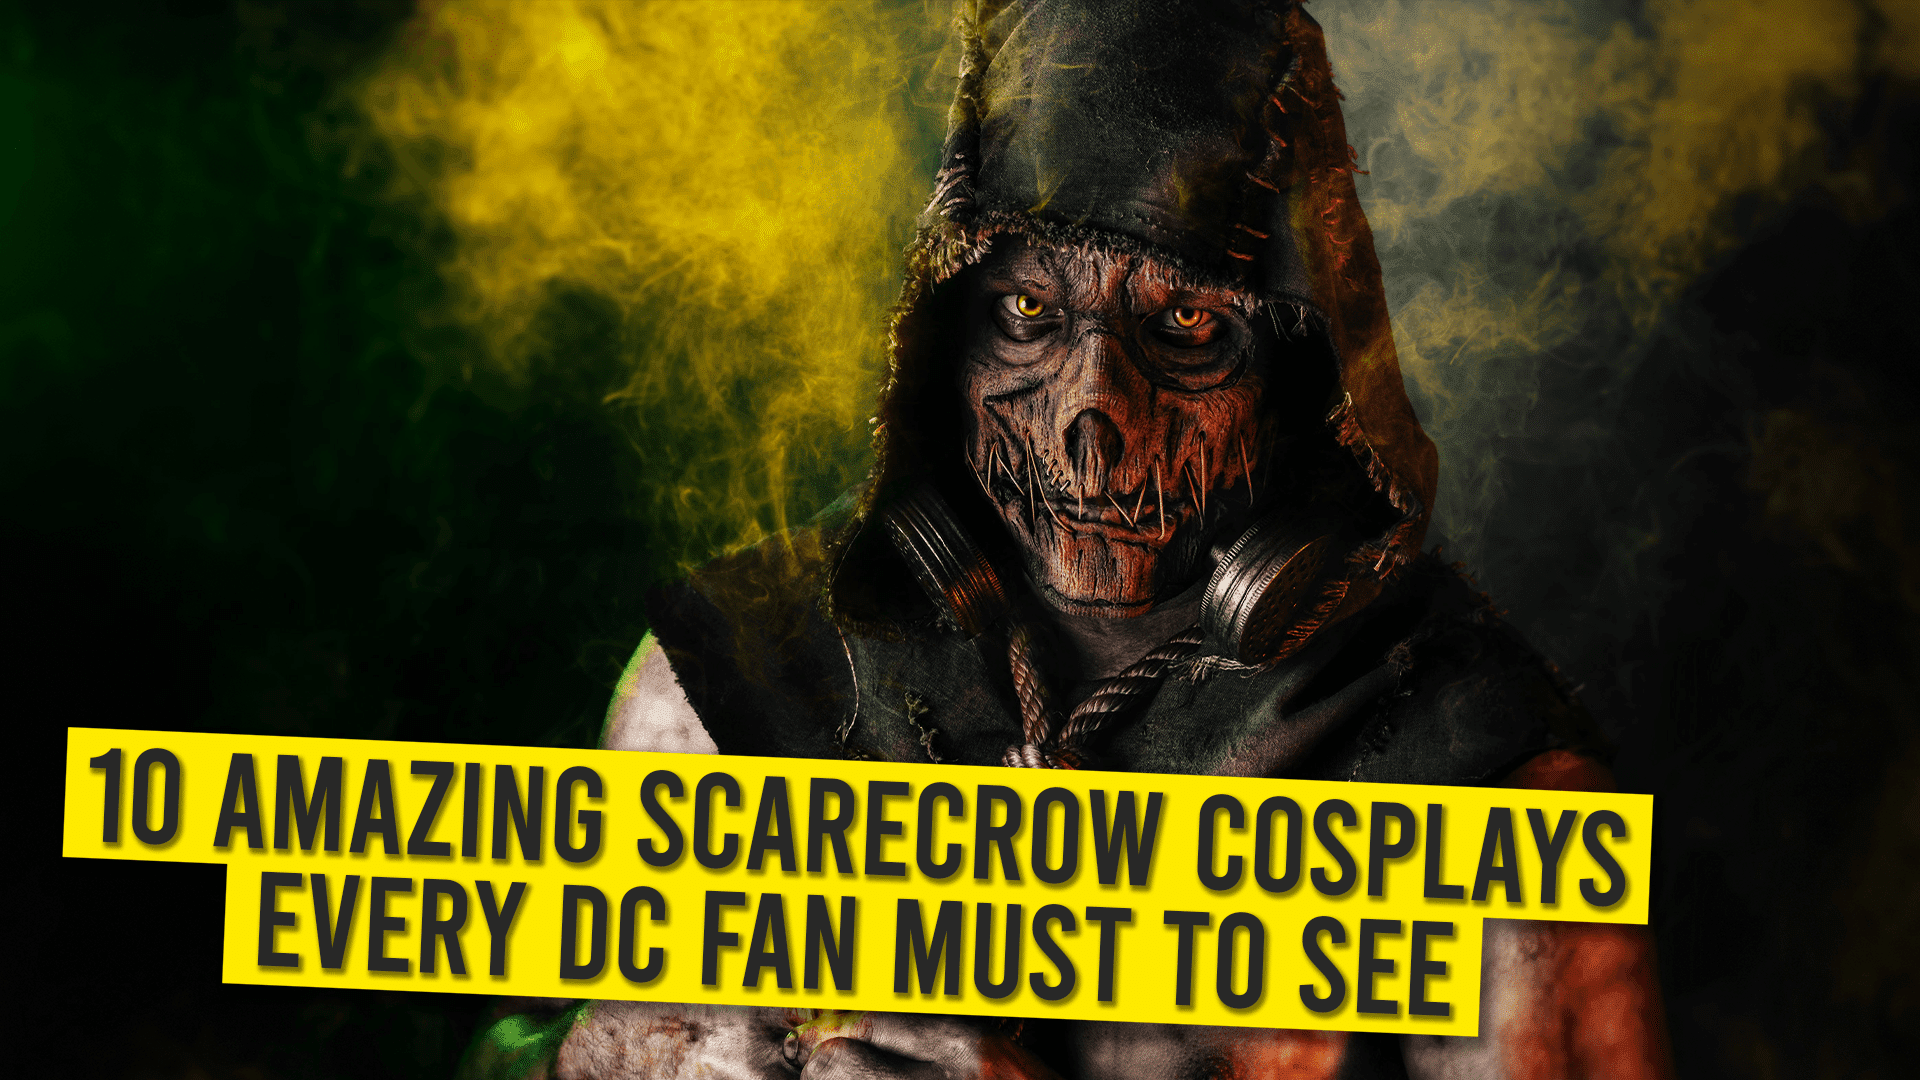 10 Amazing Scarecrow Cosplays Every DC Fan Must To See